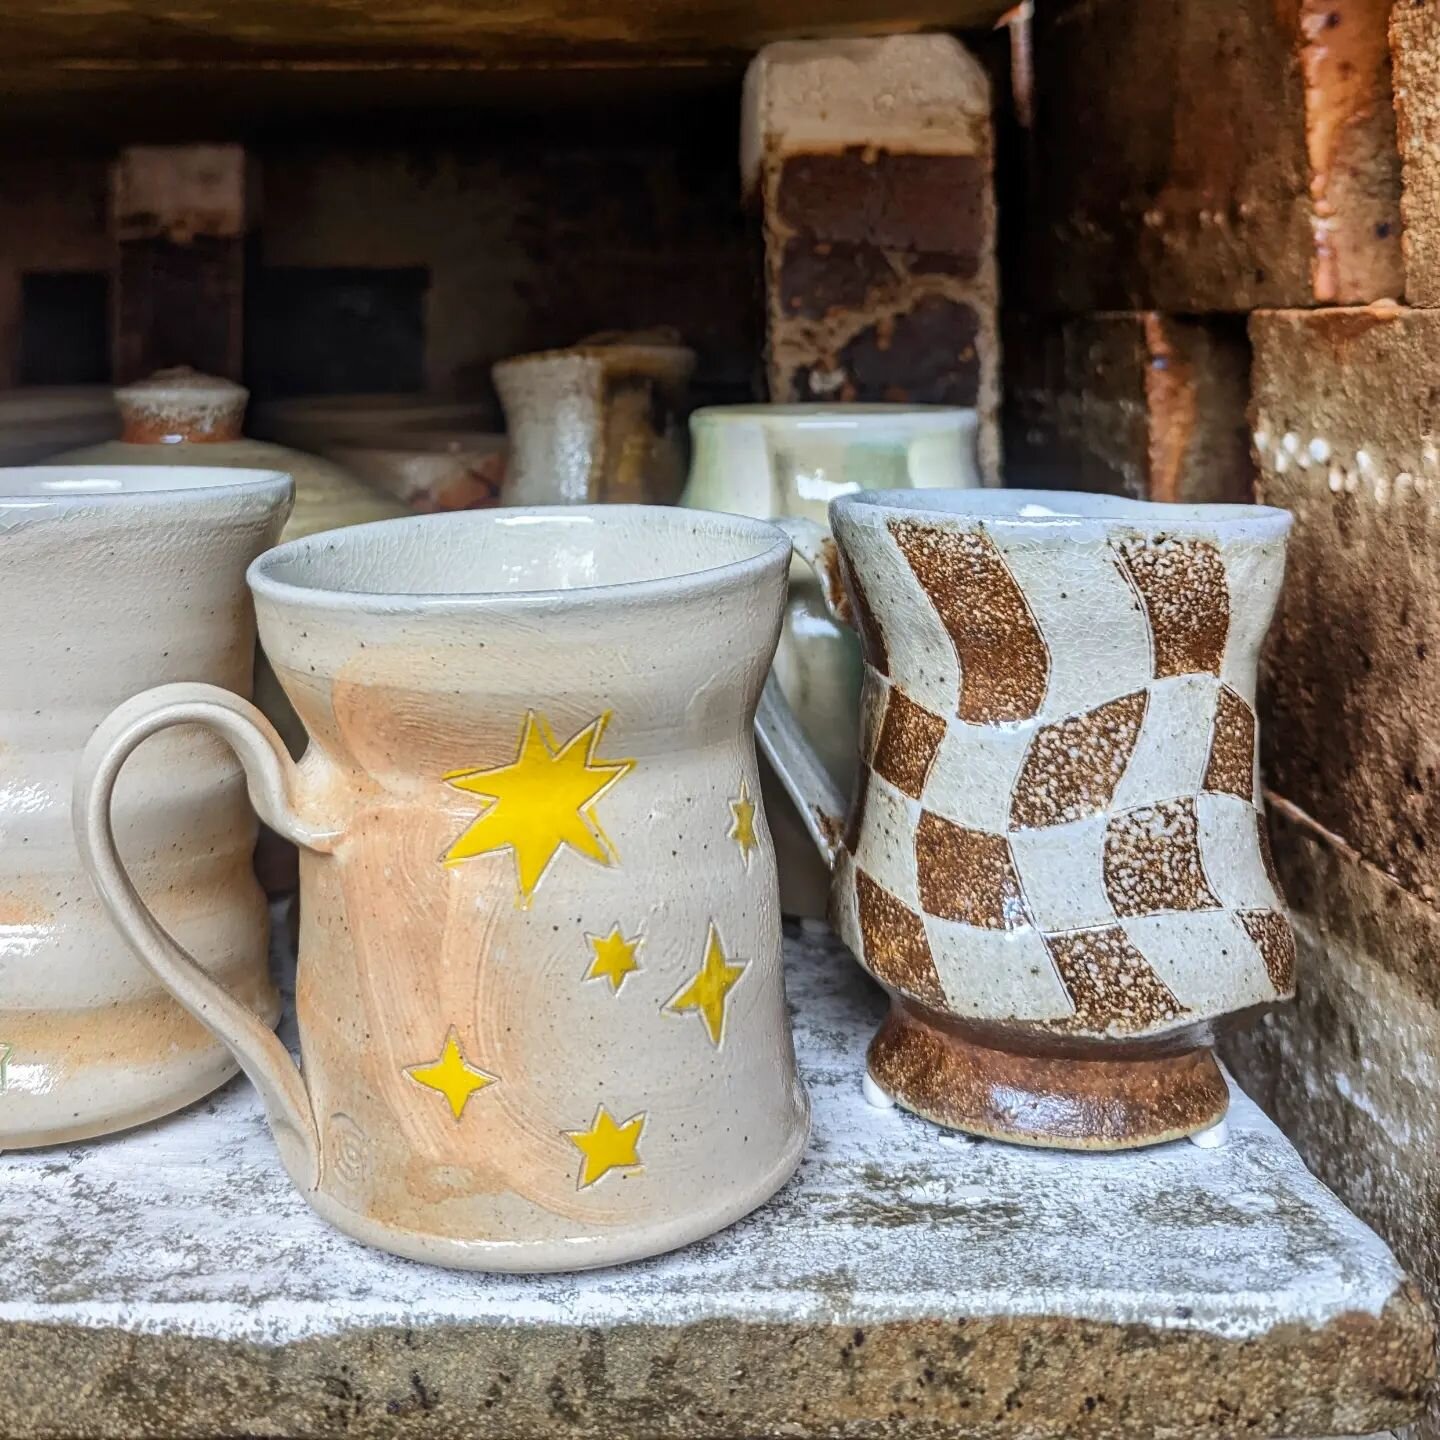 New soda pots! I'm really happy with our most recent soda firing with Mary Law. I got a lot of mugs out of this one! We're going to have a group sale at Mary's studio in West Berkeley on Nov 12, so save the date! I'll post more info soon.